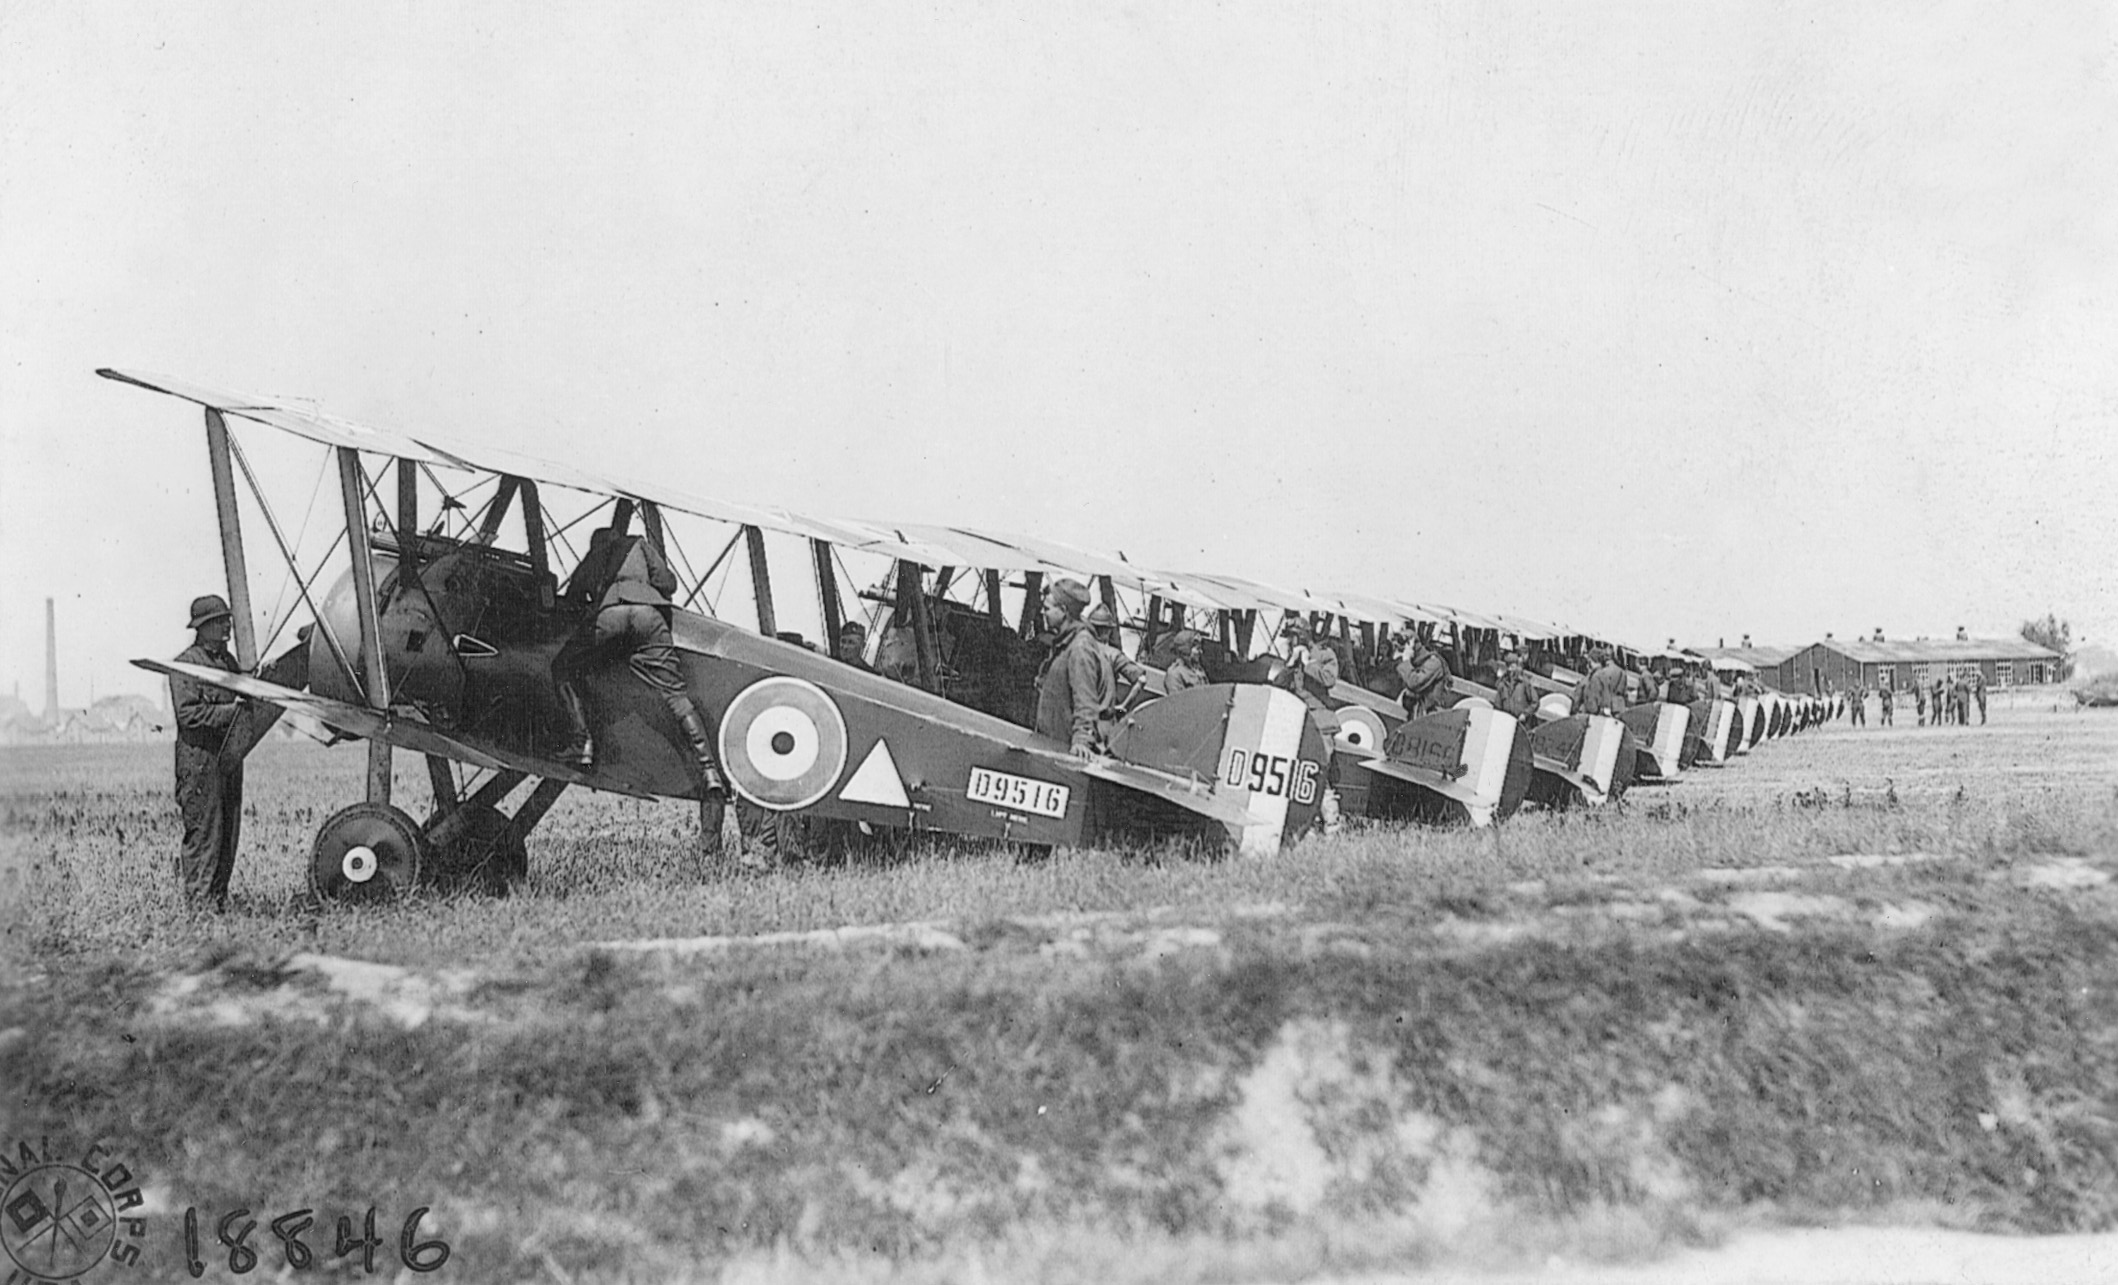 The 148th American Aero Squadron in Petite Sythe, France.